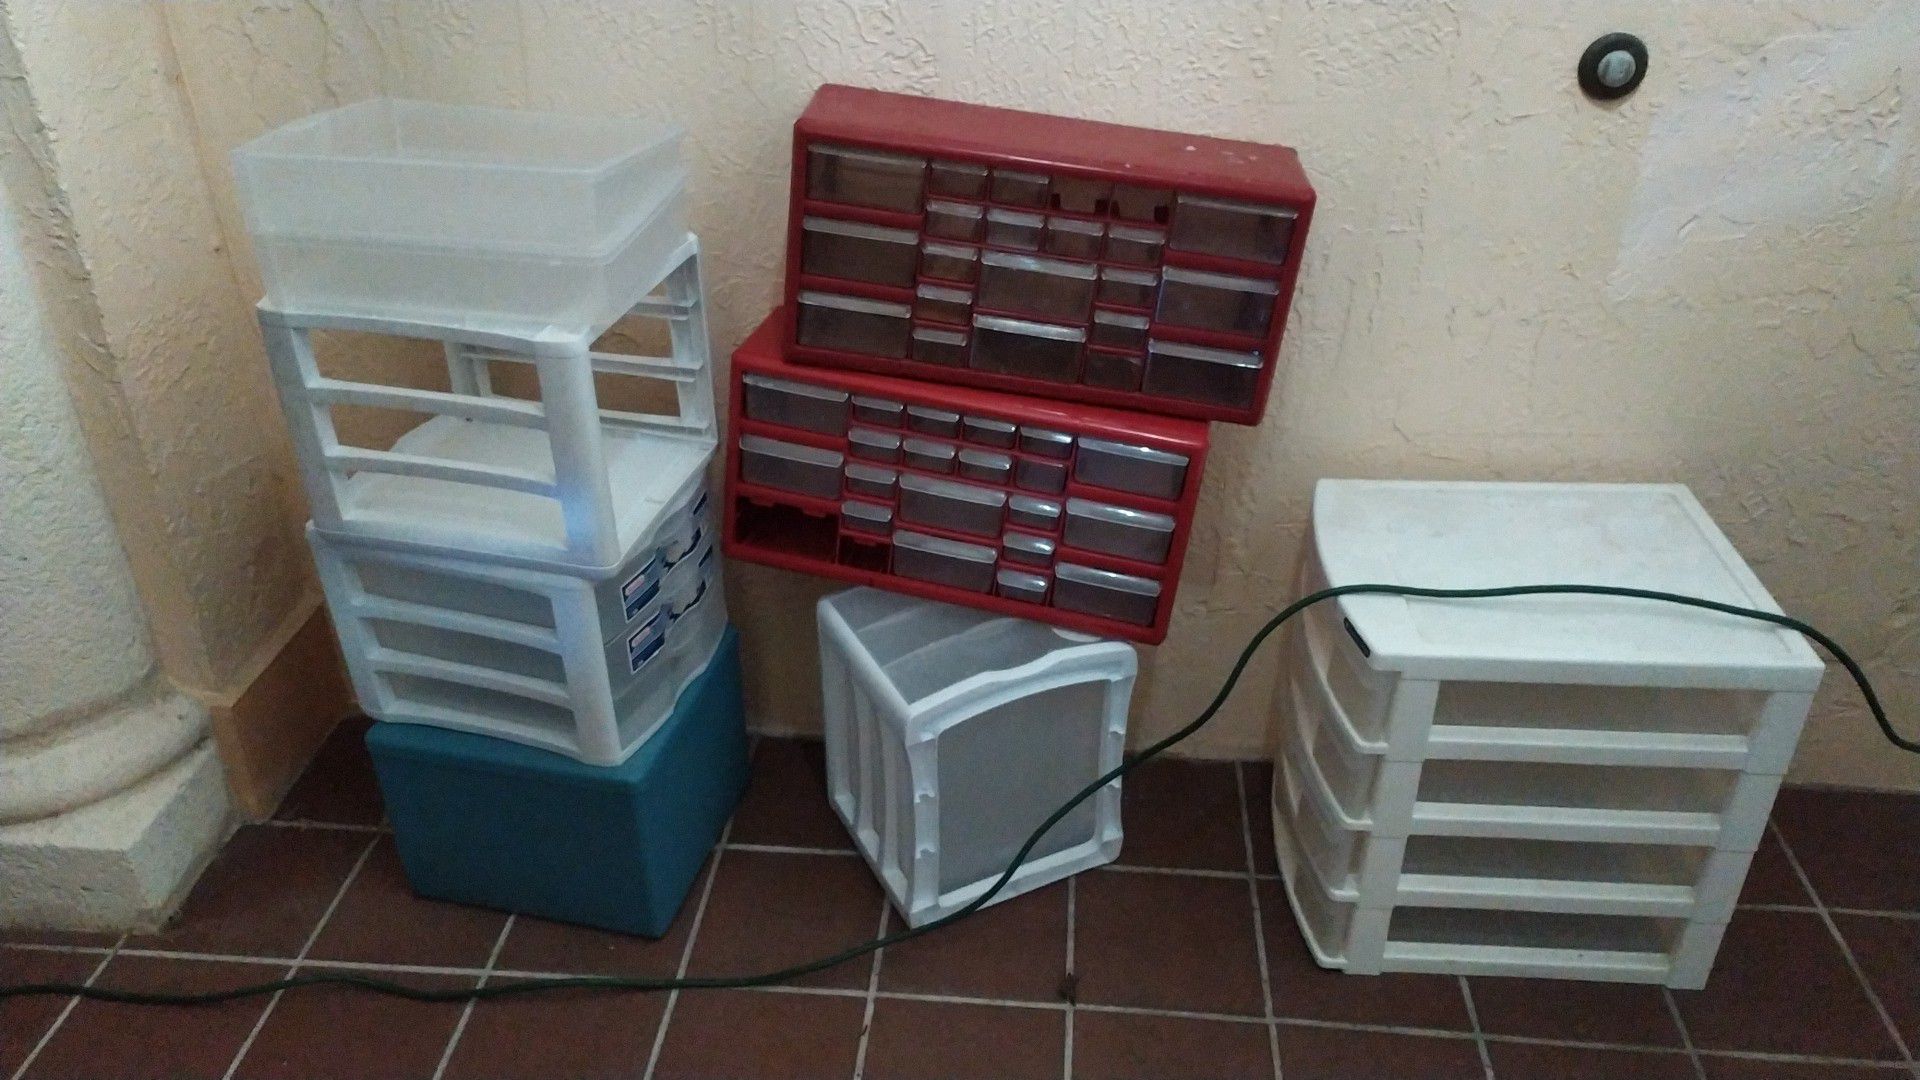 Plastic storage drawers. Each for $4.99.